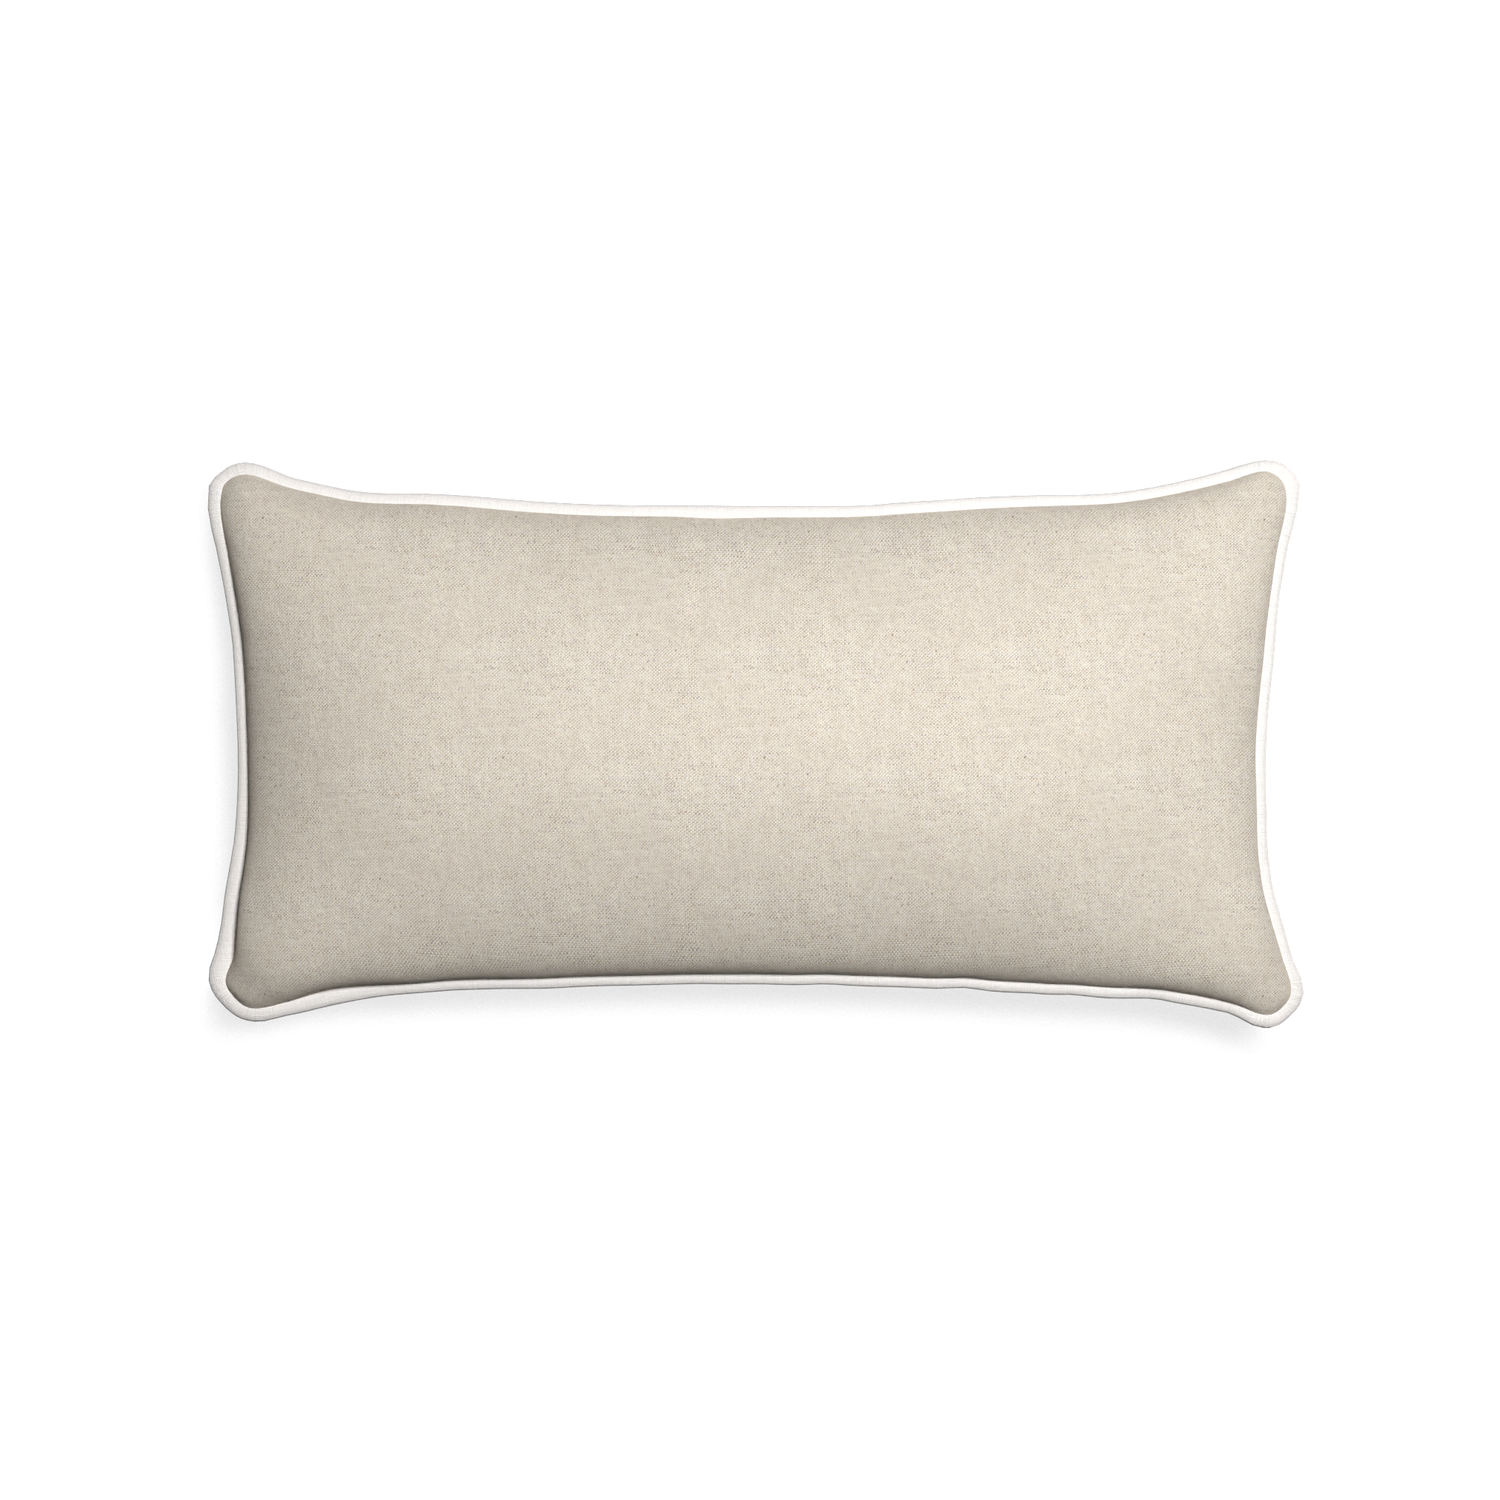 Midi-lumbar oat custom light brownpillow with snow piping on white background